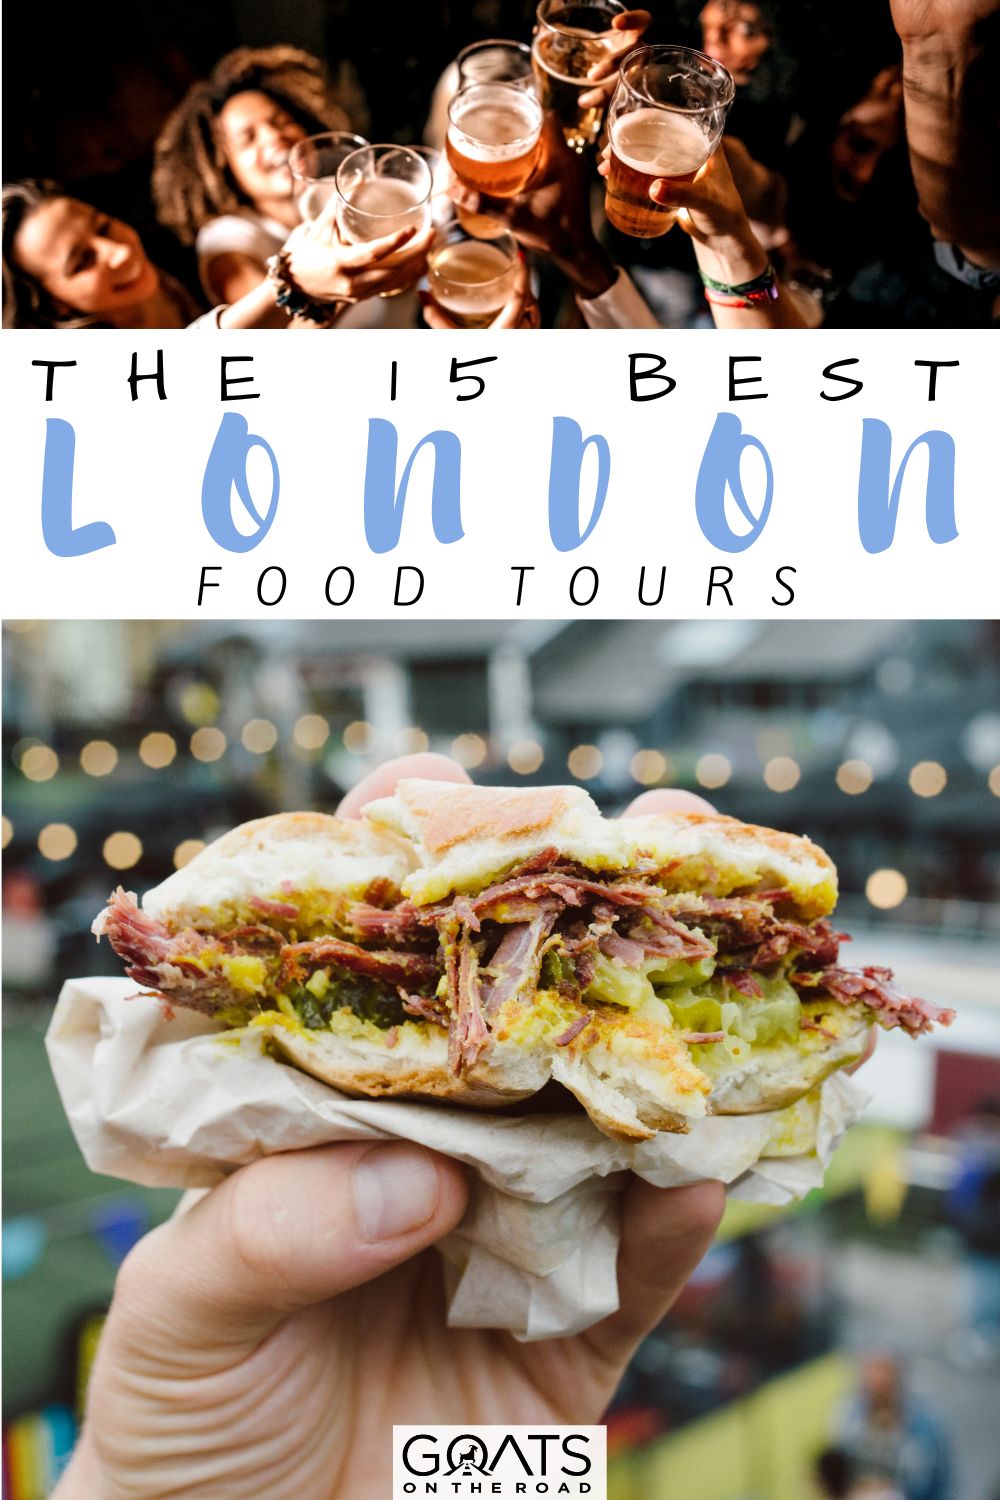 “The 15 Best London Food Tours